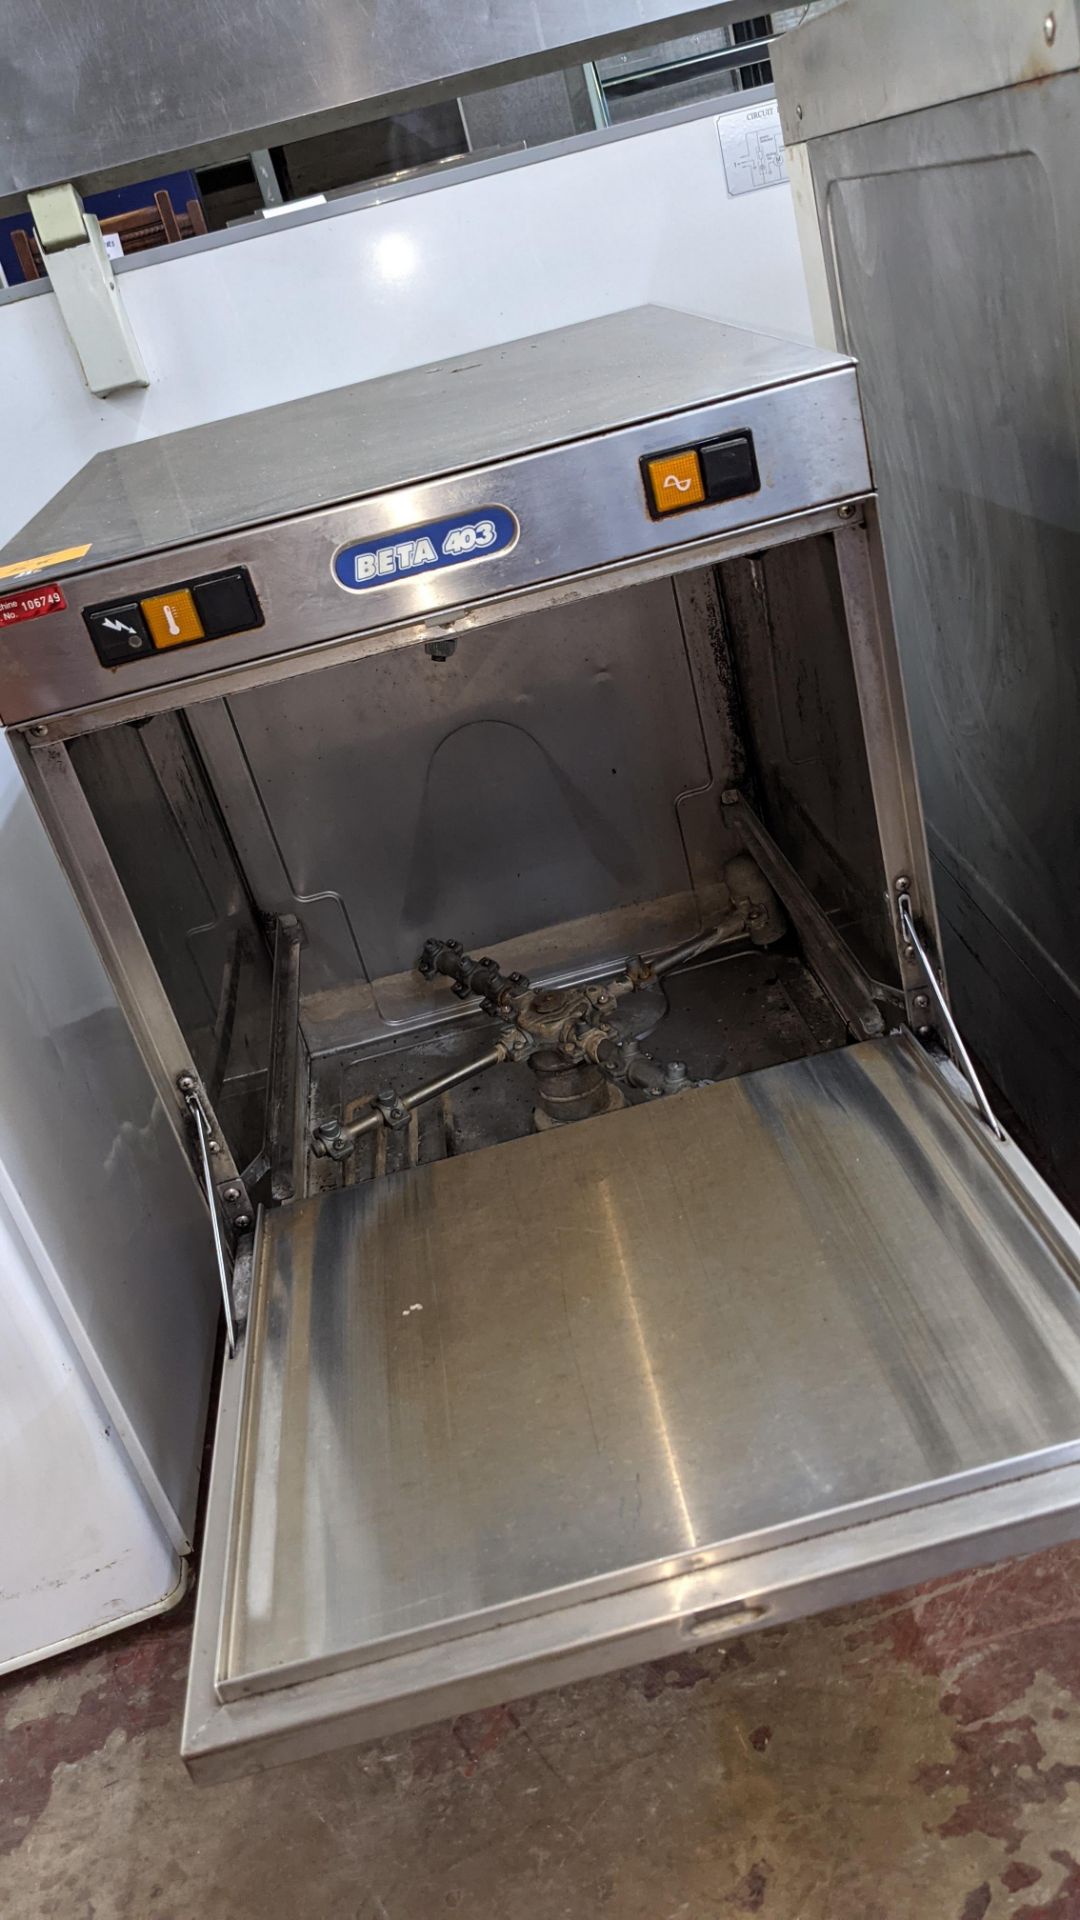 Beta 403 stainless steel commercial glass washer - Image 4 of 6